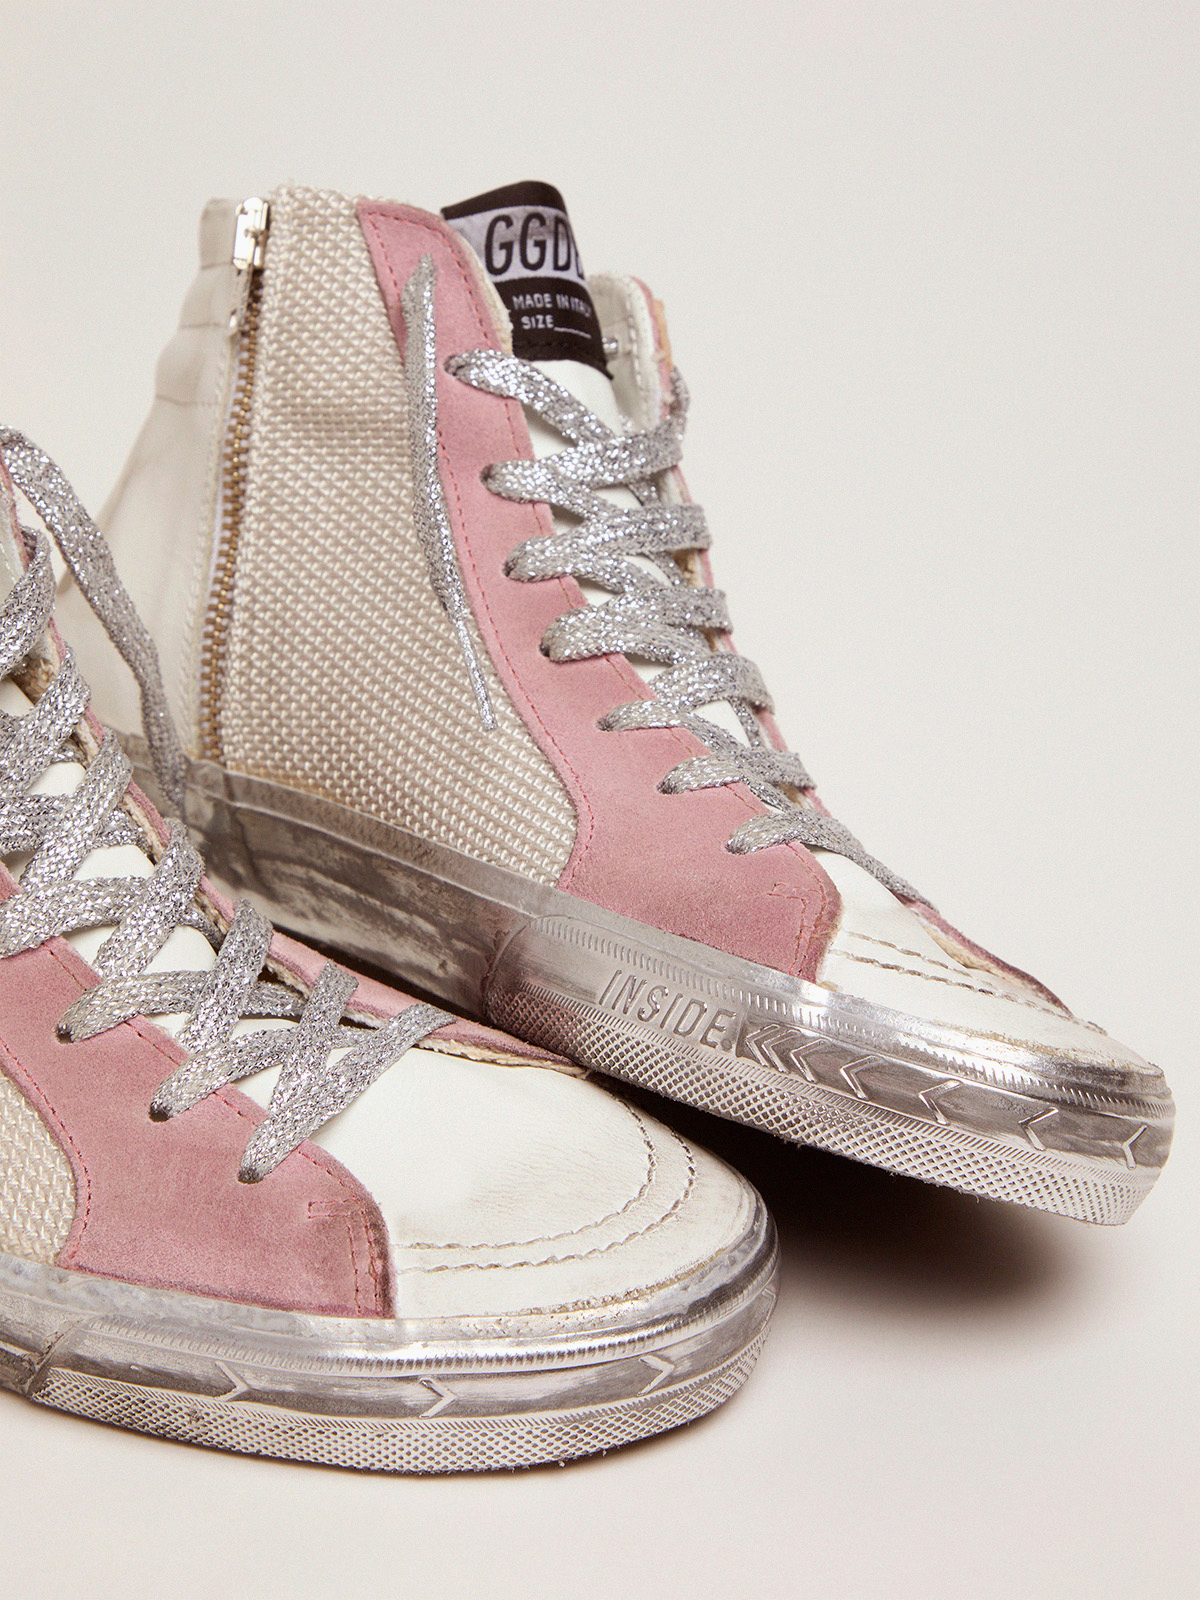 Slide sneakers with white and pink upper | Golden Goose